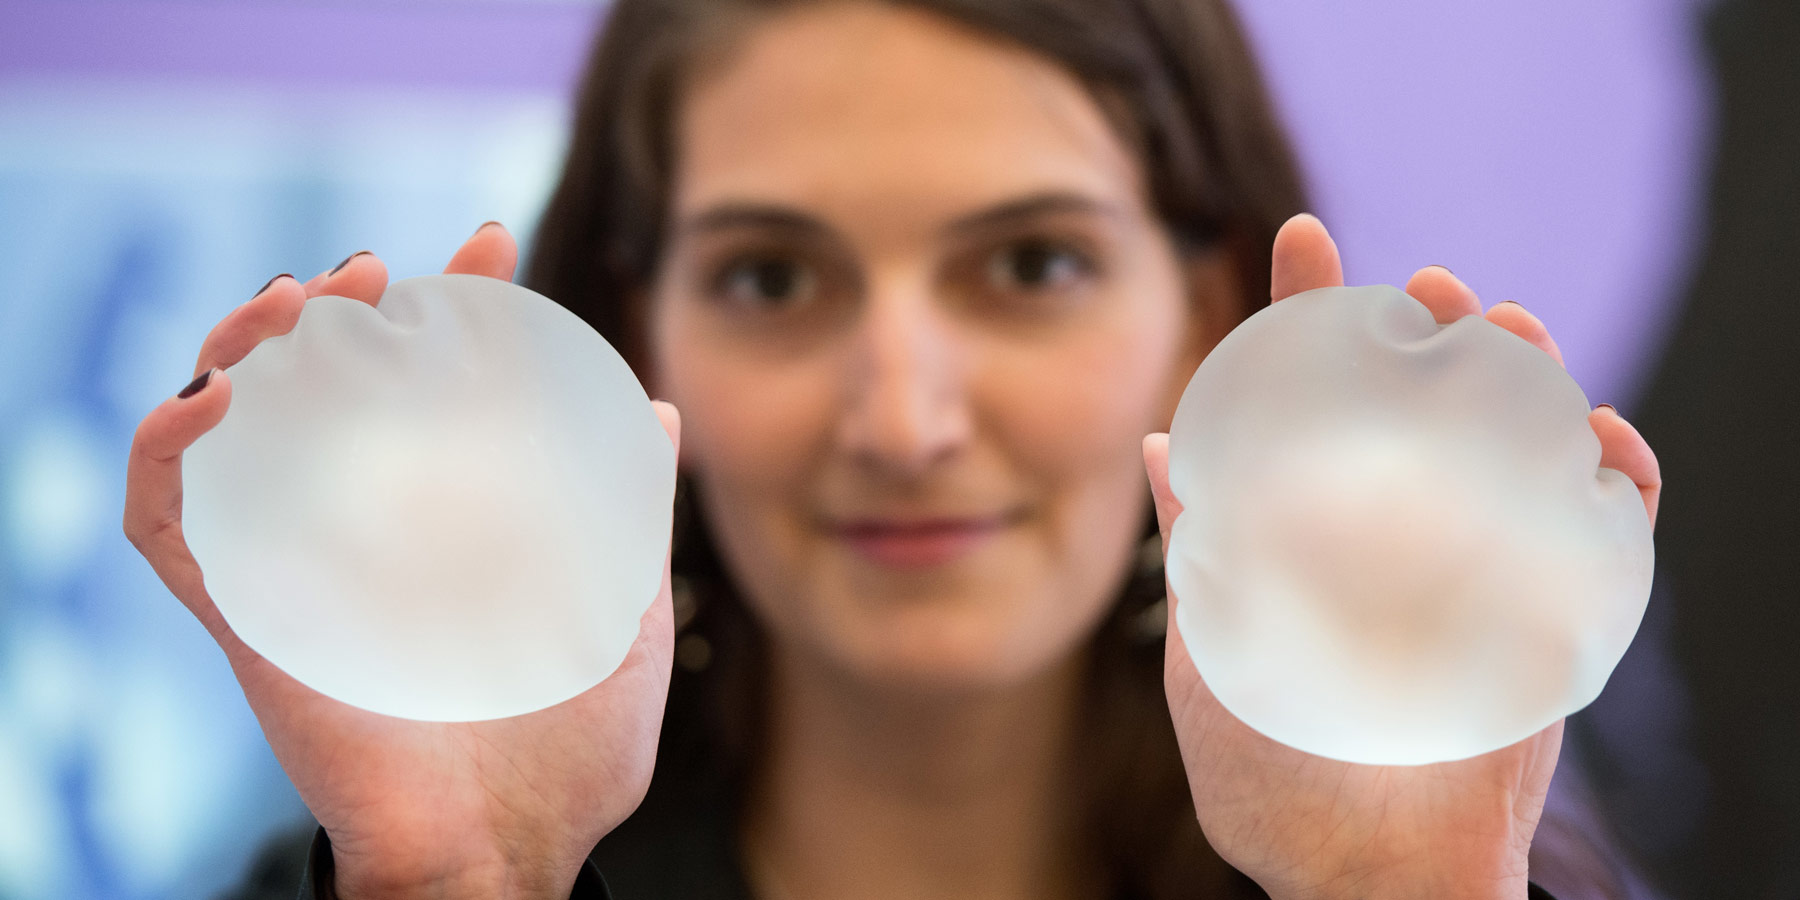 What are textured breast implants and are they safe?